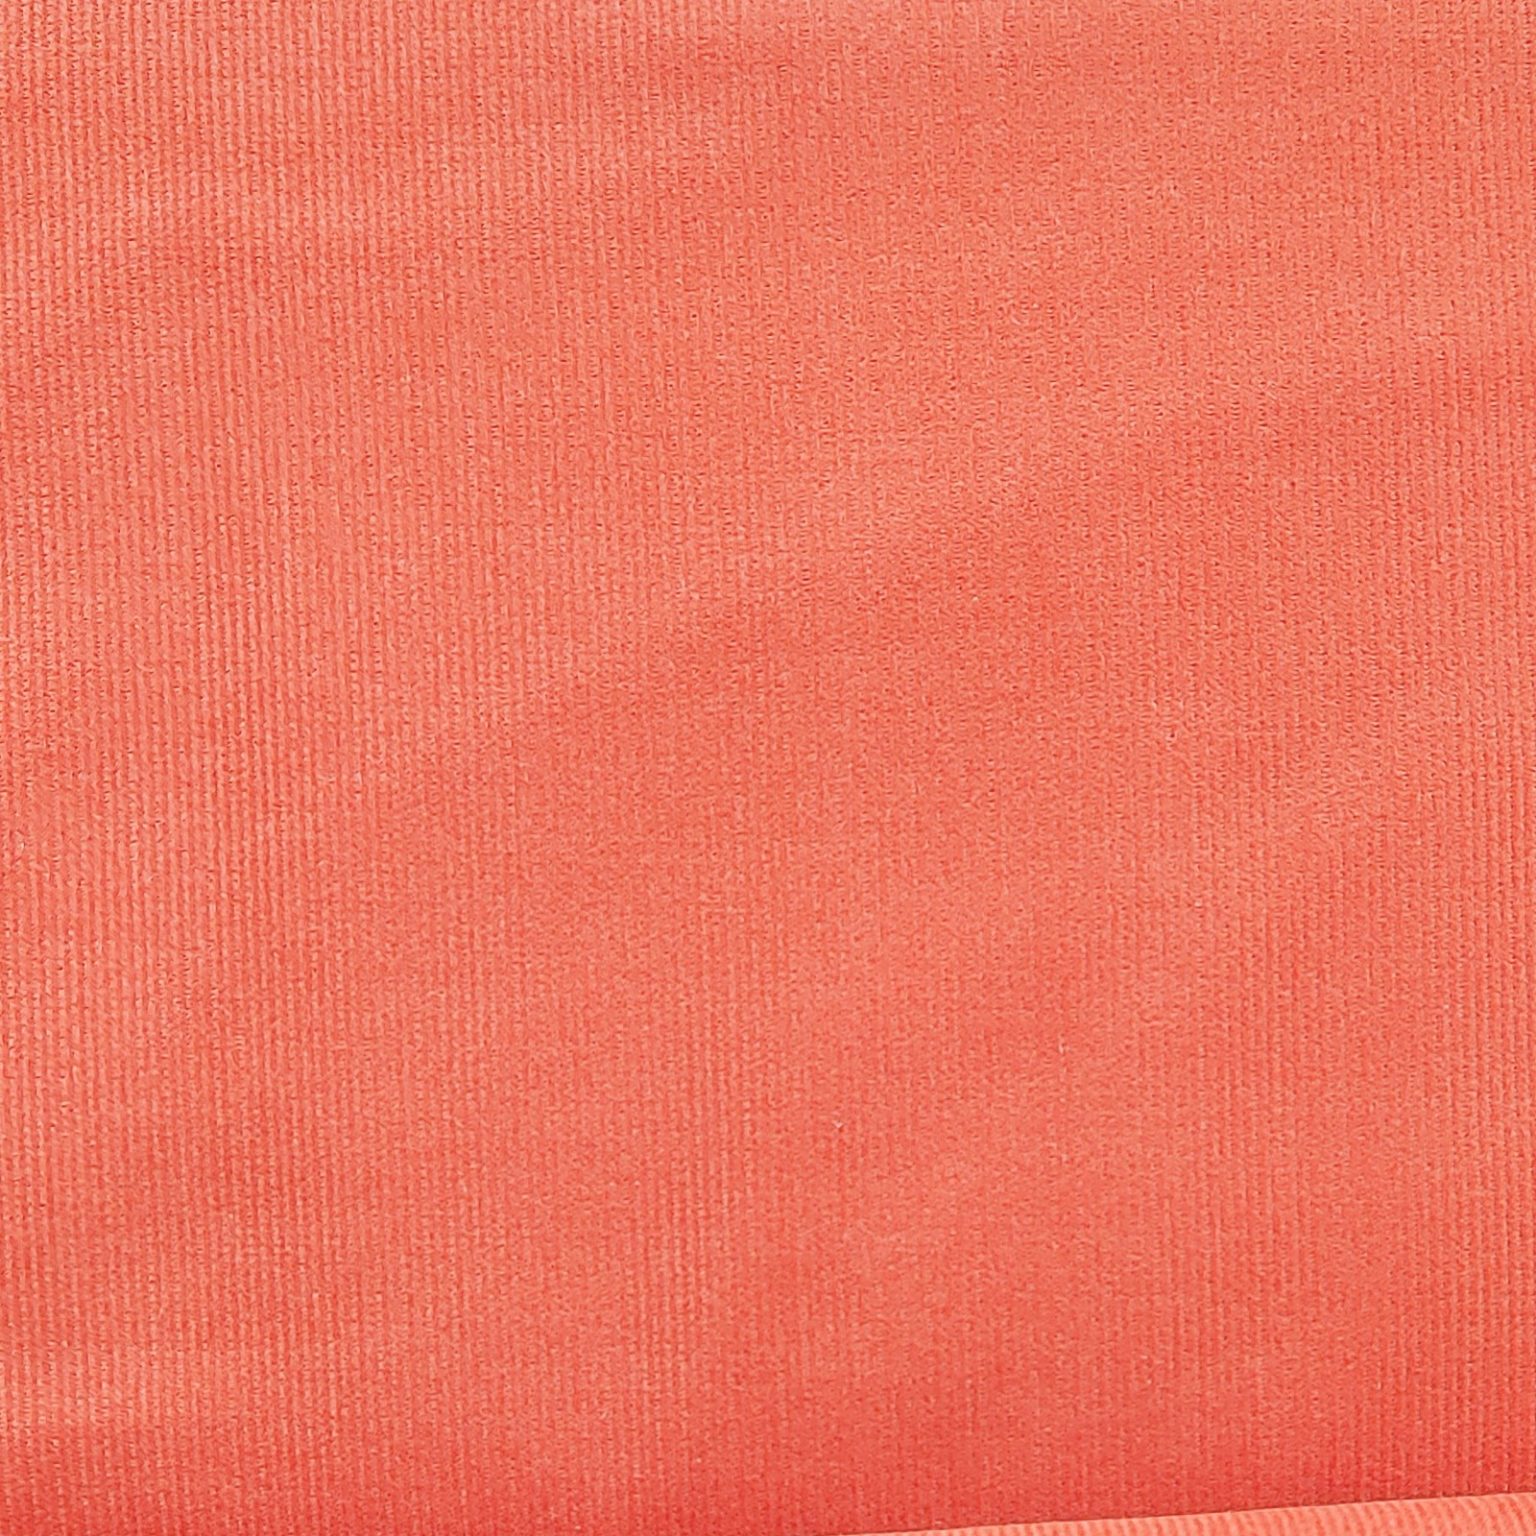 cotton corduroy fabric at More Sewing